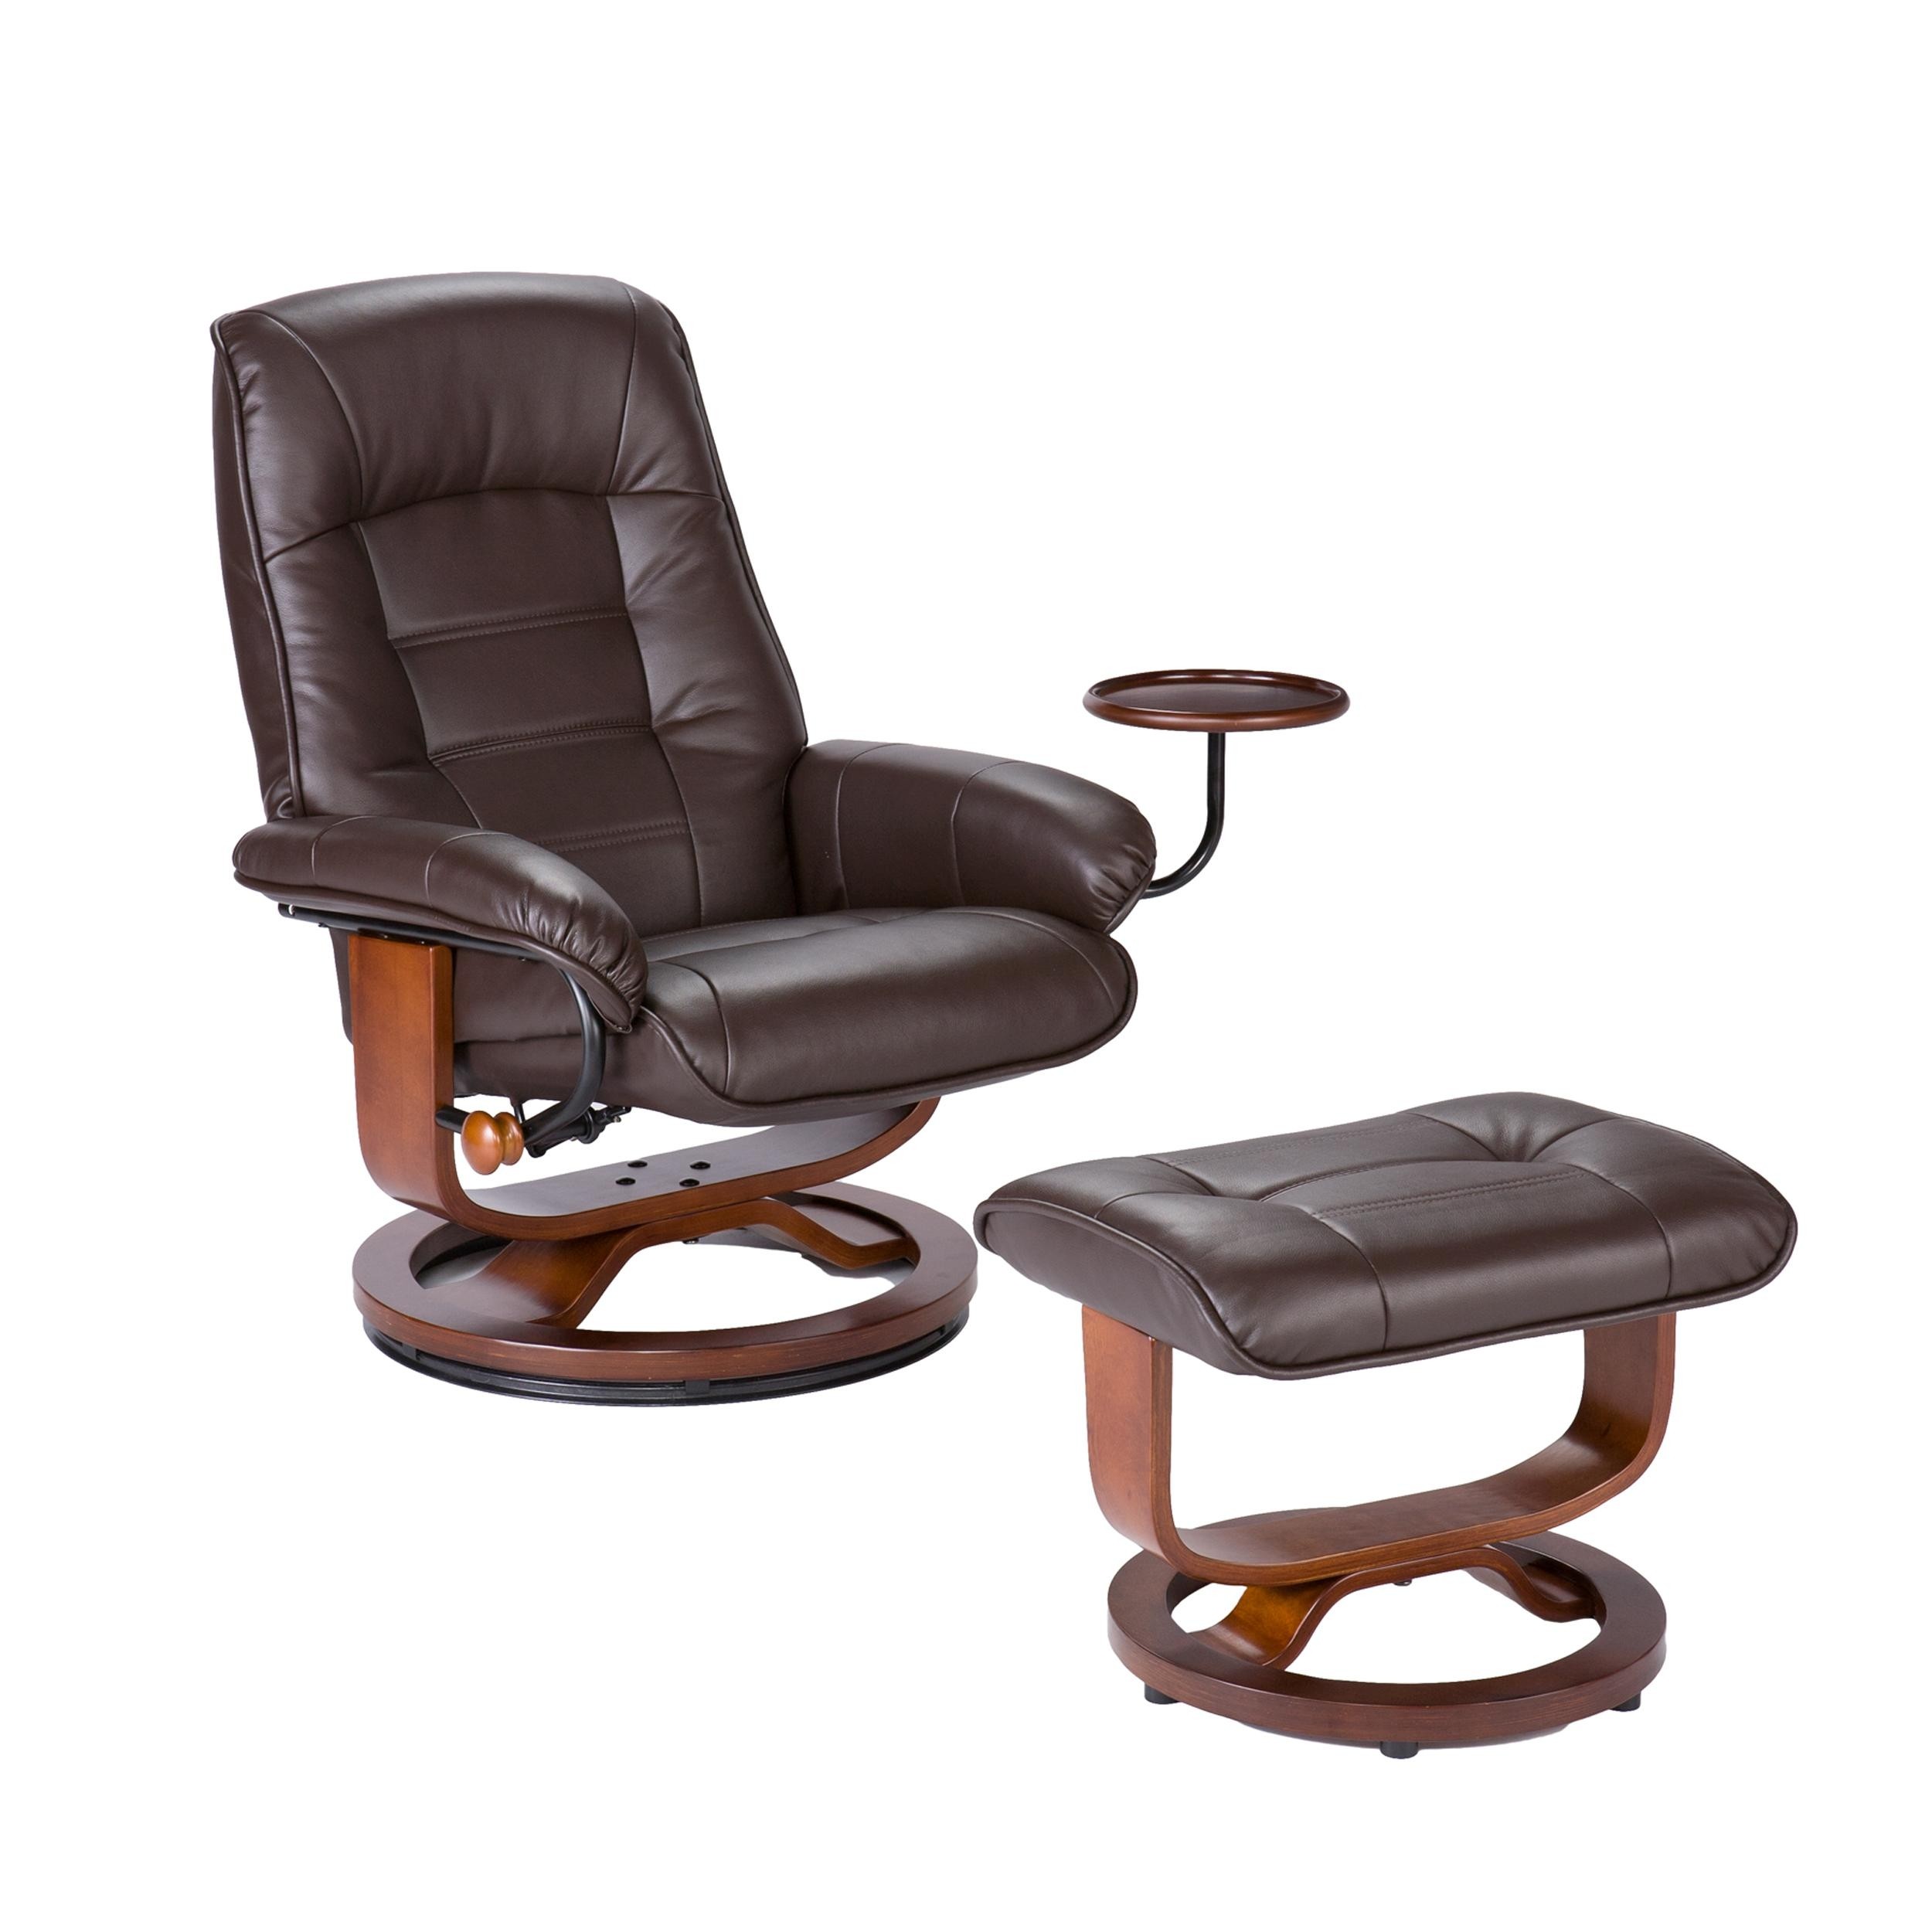 Lane recliners on sale for your comfort